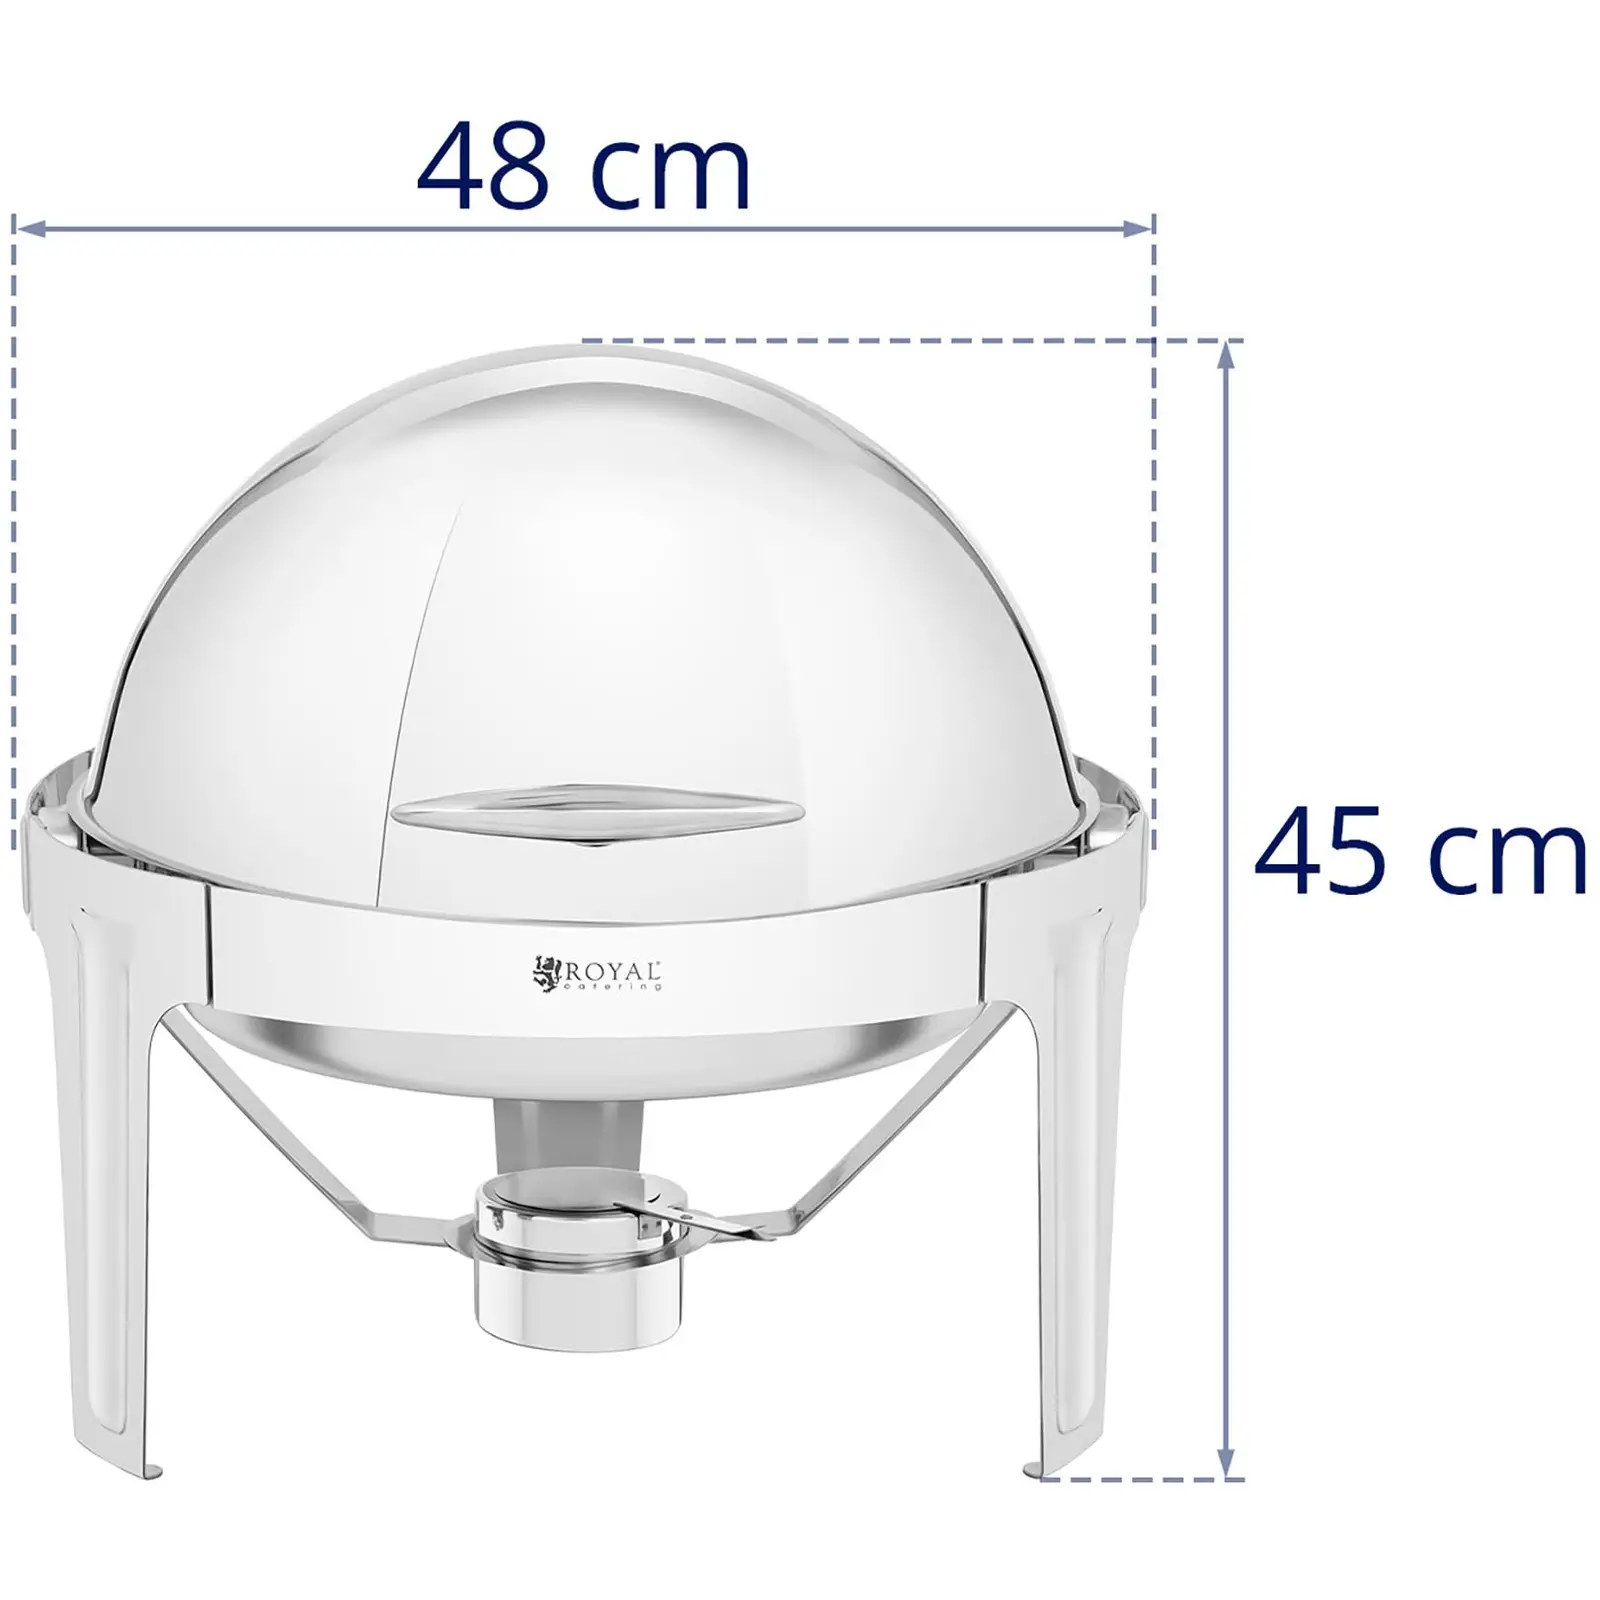 Chafing Dish - round - Royal Catering - 5.8 L